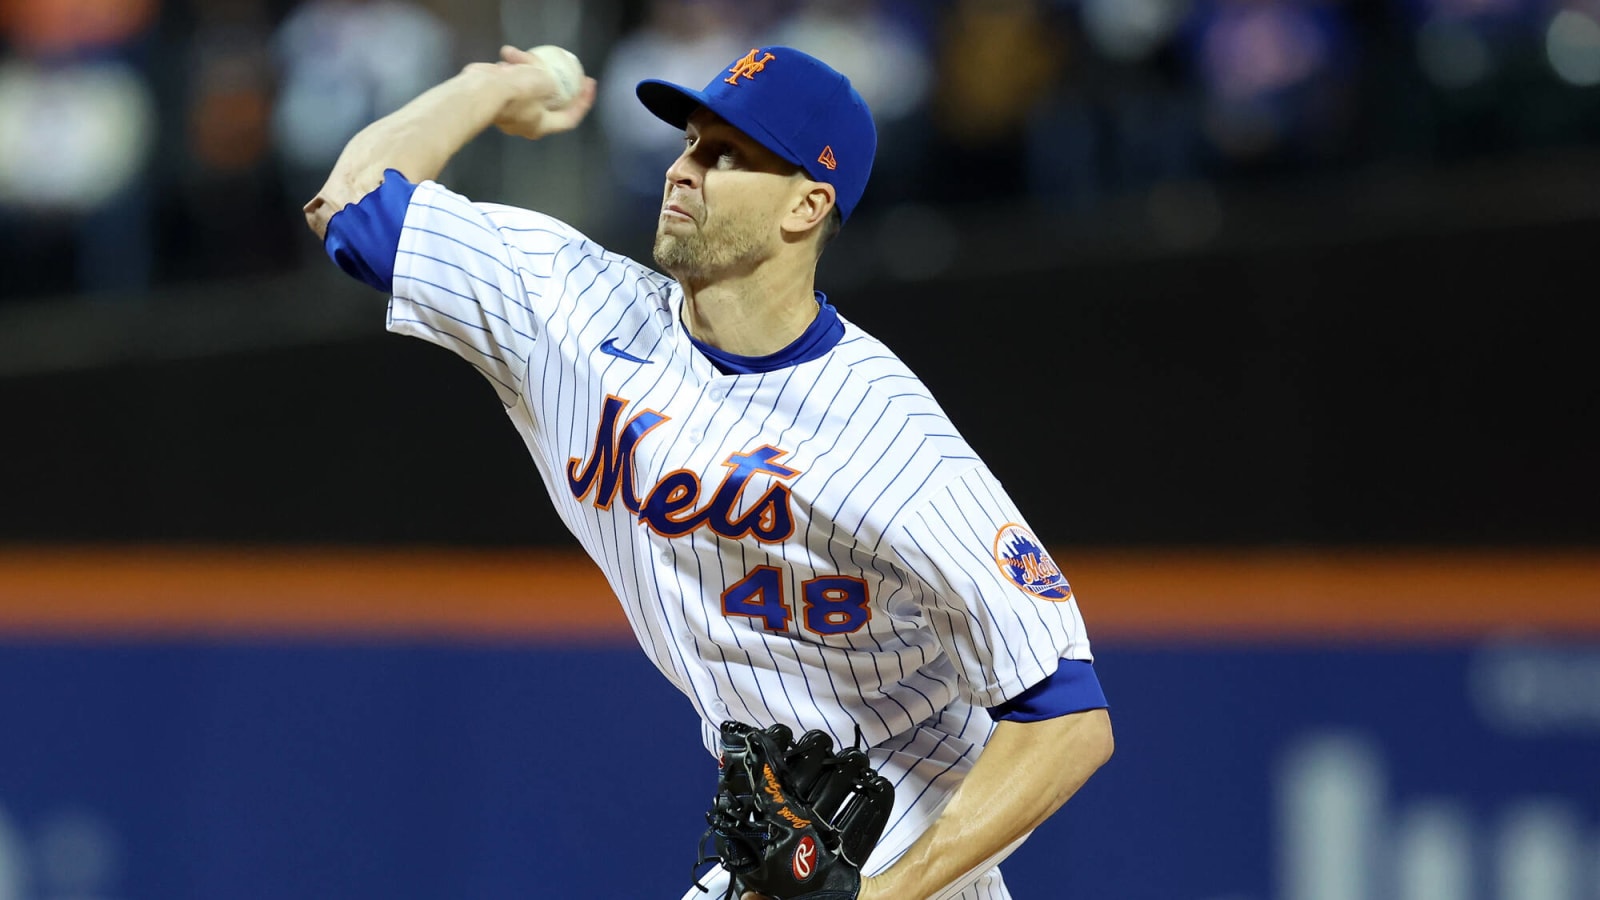 Keith Hernandez: Jacob deGrom would still be with Mets if healthy